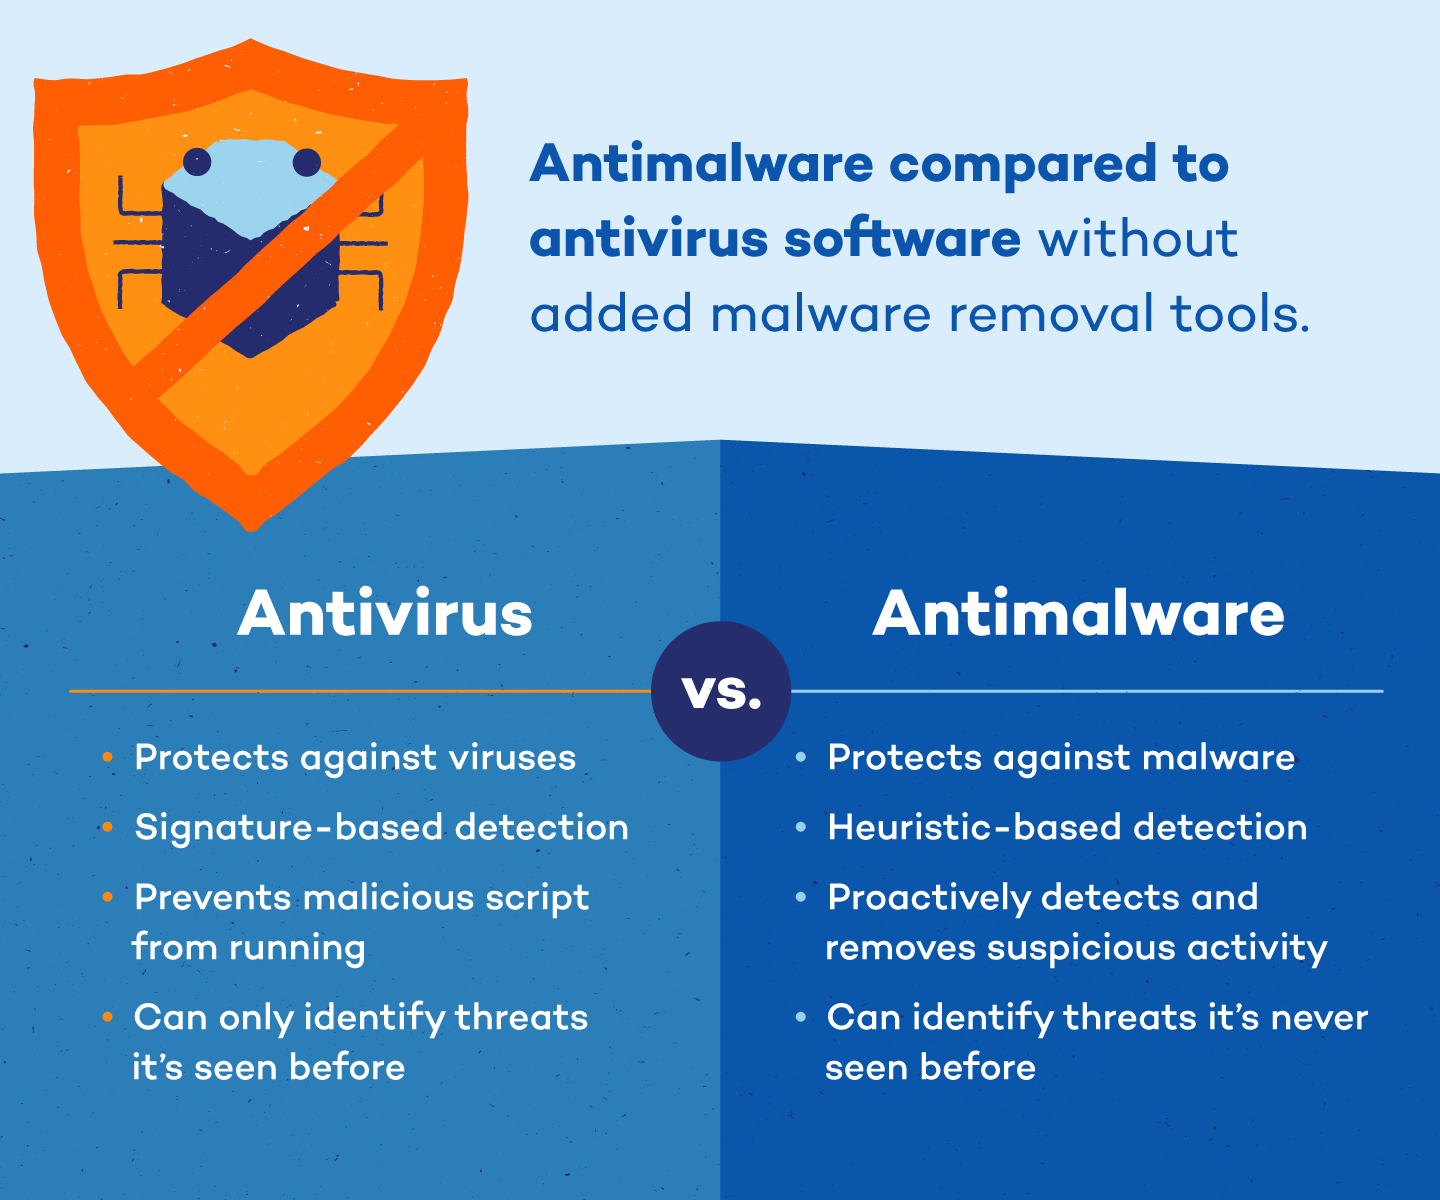 Use a reliable antivirus or antimalware program to scan your computer for any potential malware infections.
If any threats are detected, follow the instructions provided by the security software to remove them.